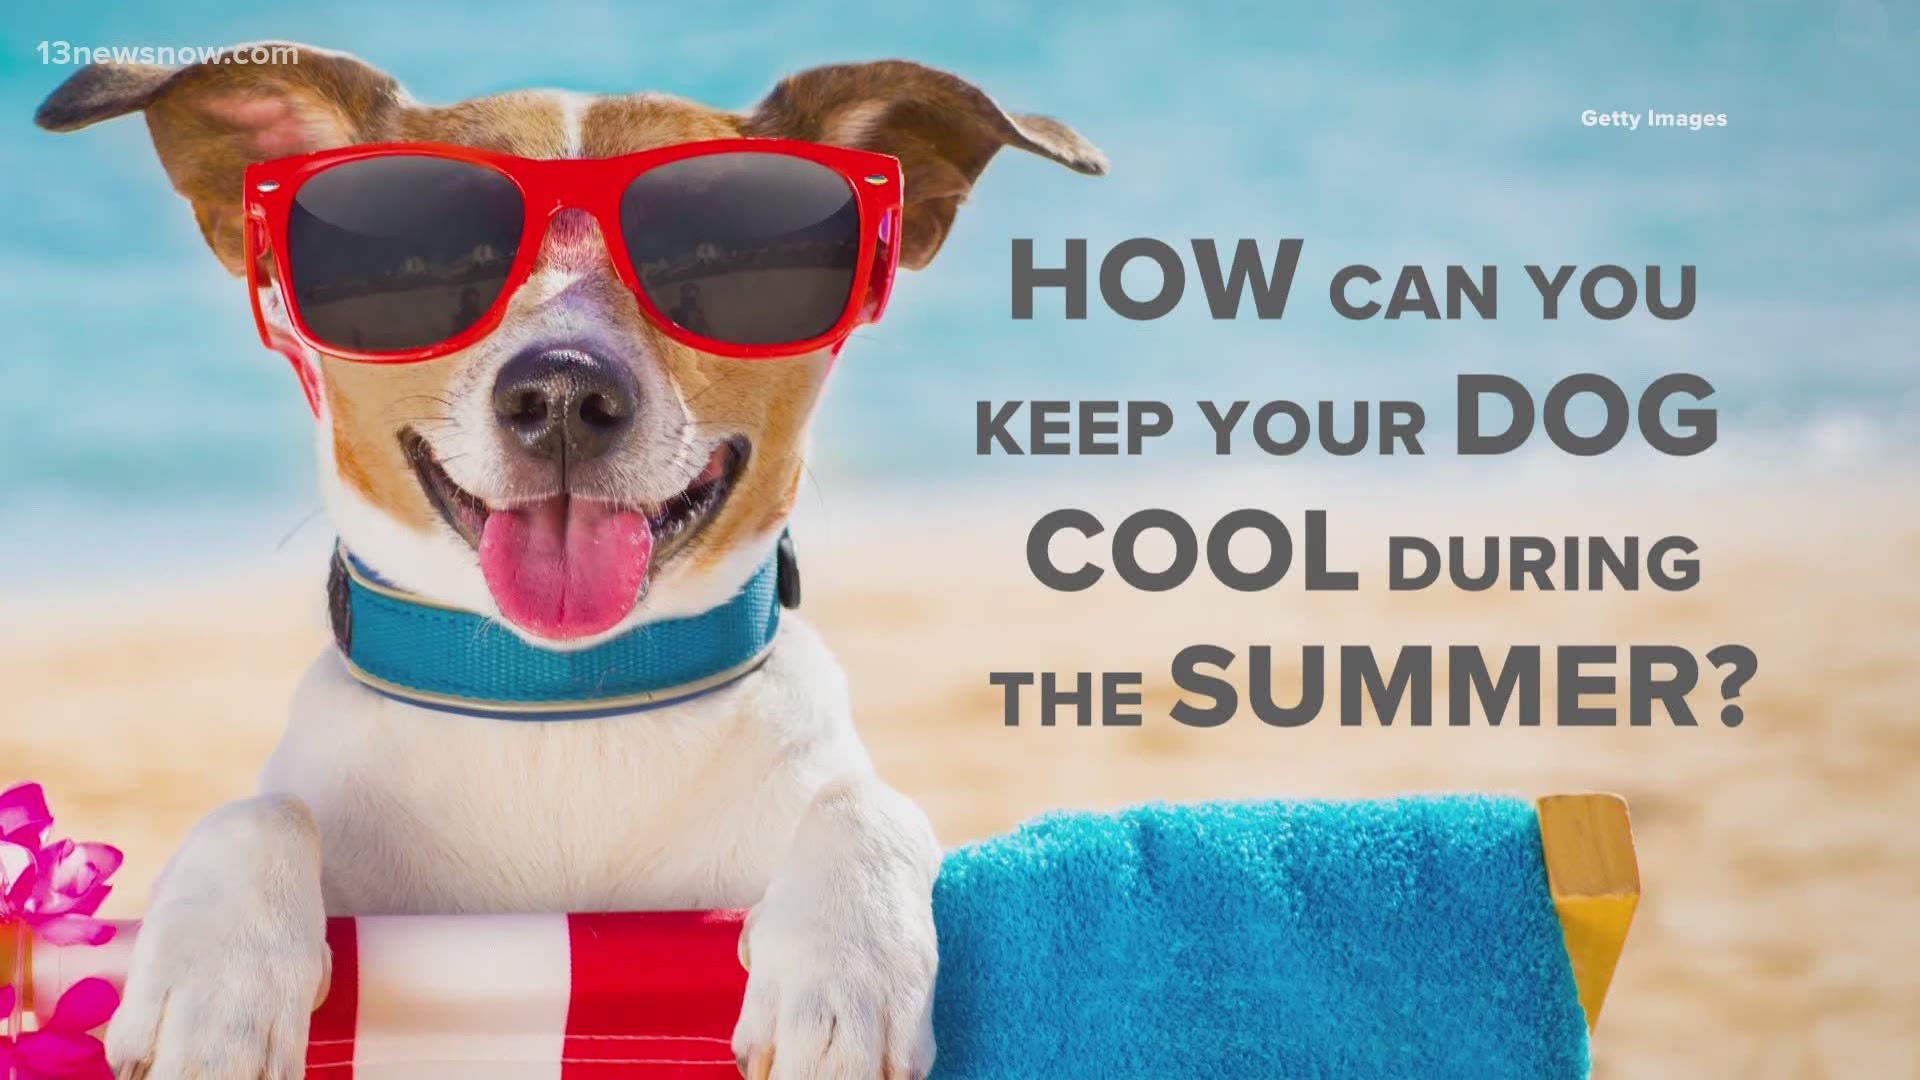 Learn about the warning signs that your dog is too hot, tips on how to cool them down, and one thing to never do.